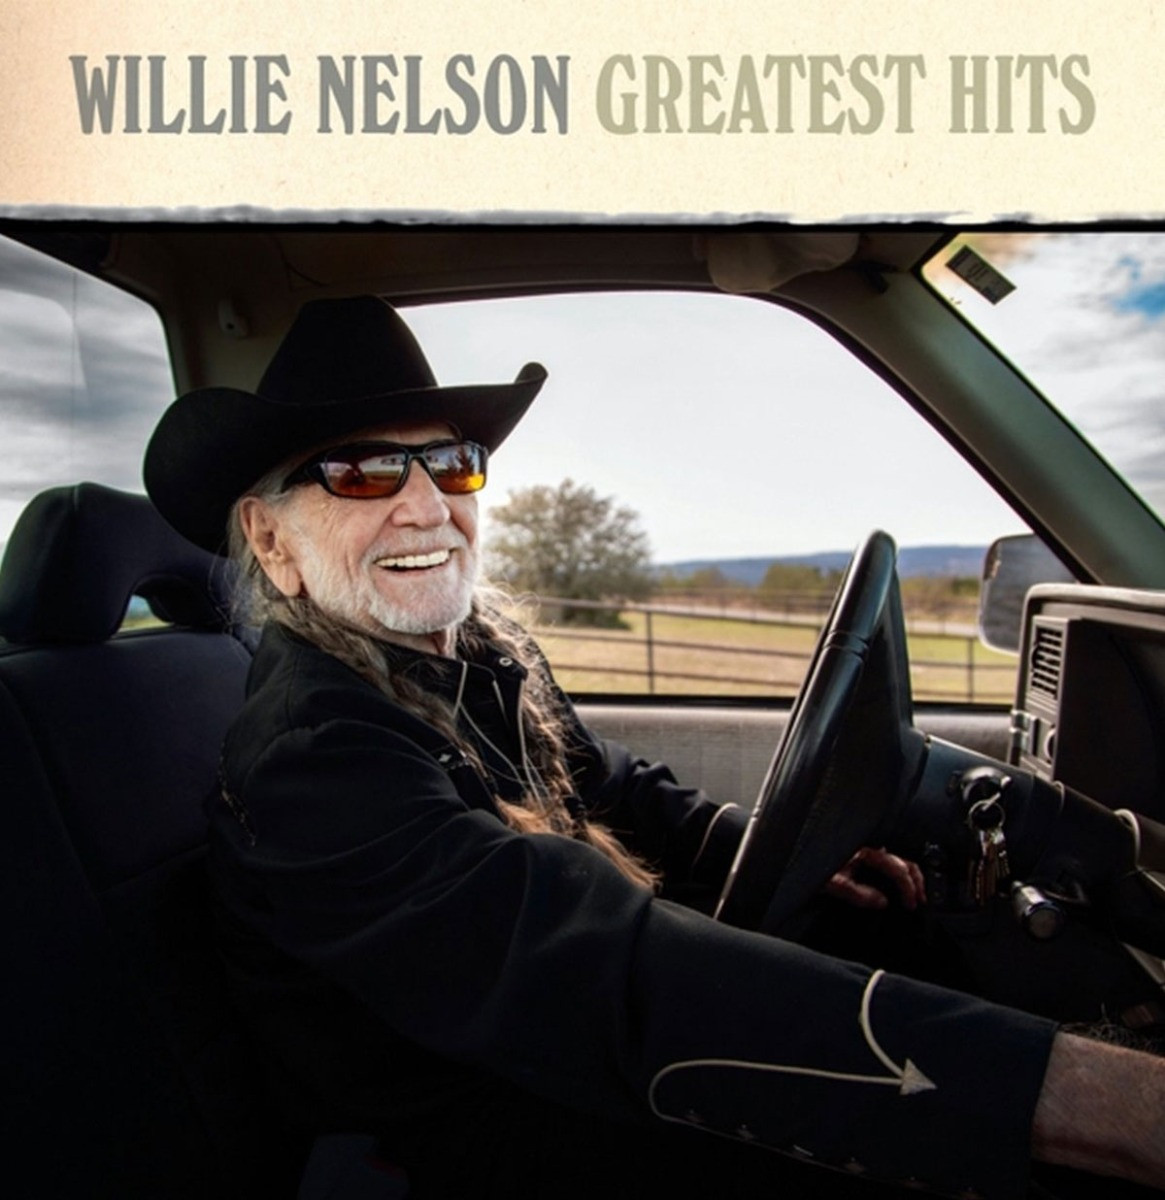 Willie Nelson - Greatest Hits 2LP